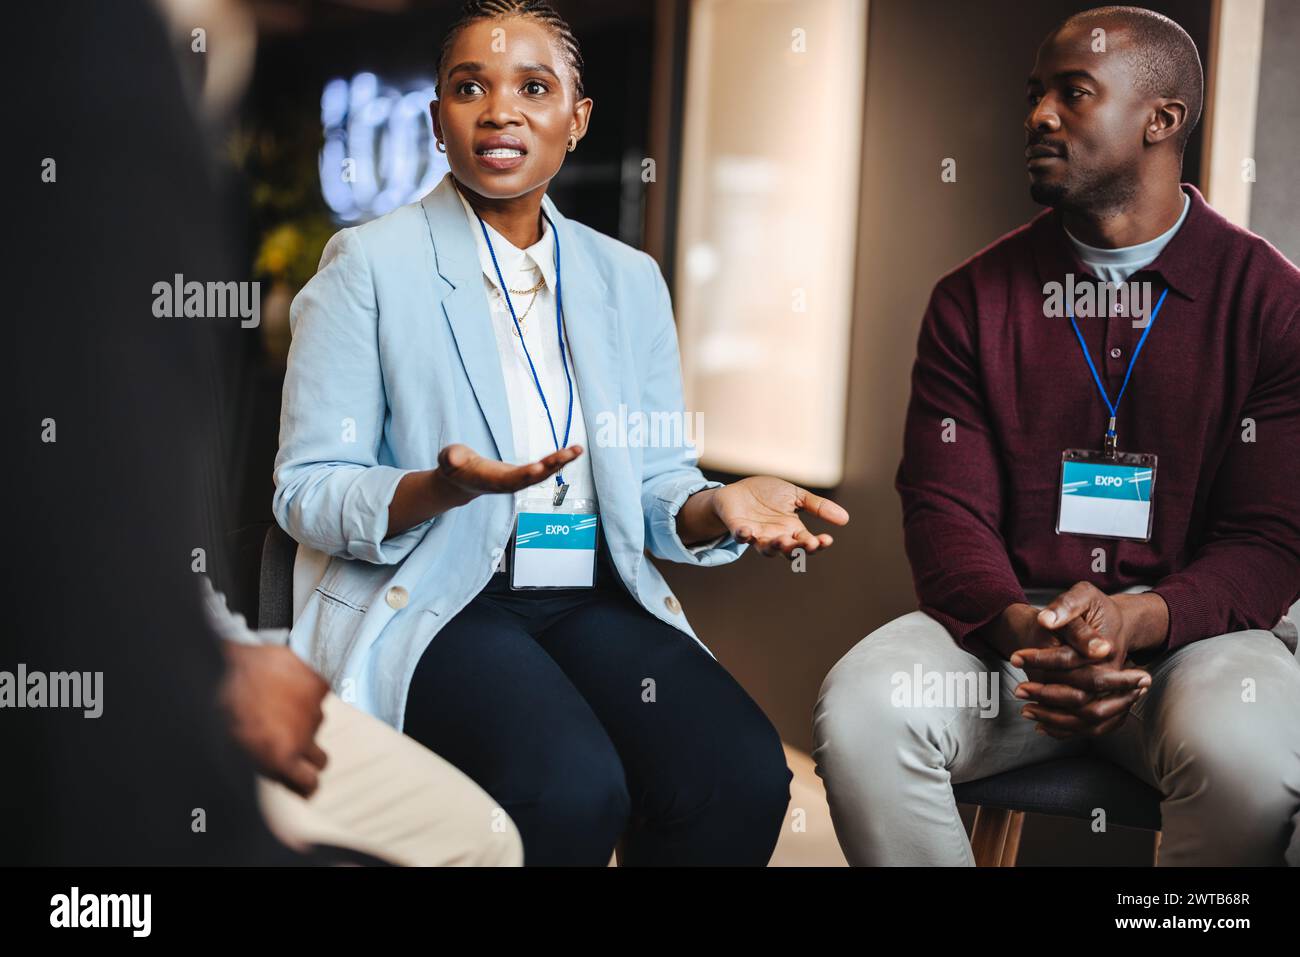 Two engaged professionals are having a focused discussion while sitting together at a business expo. Business people showing collaboration, networking Stock Photo